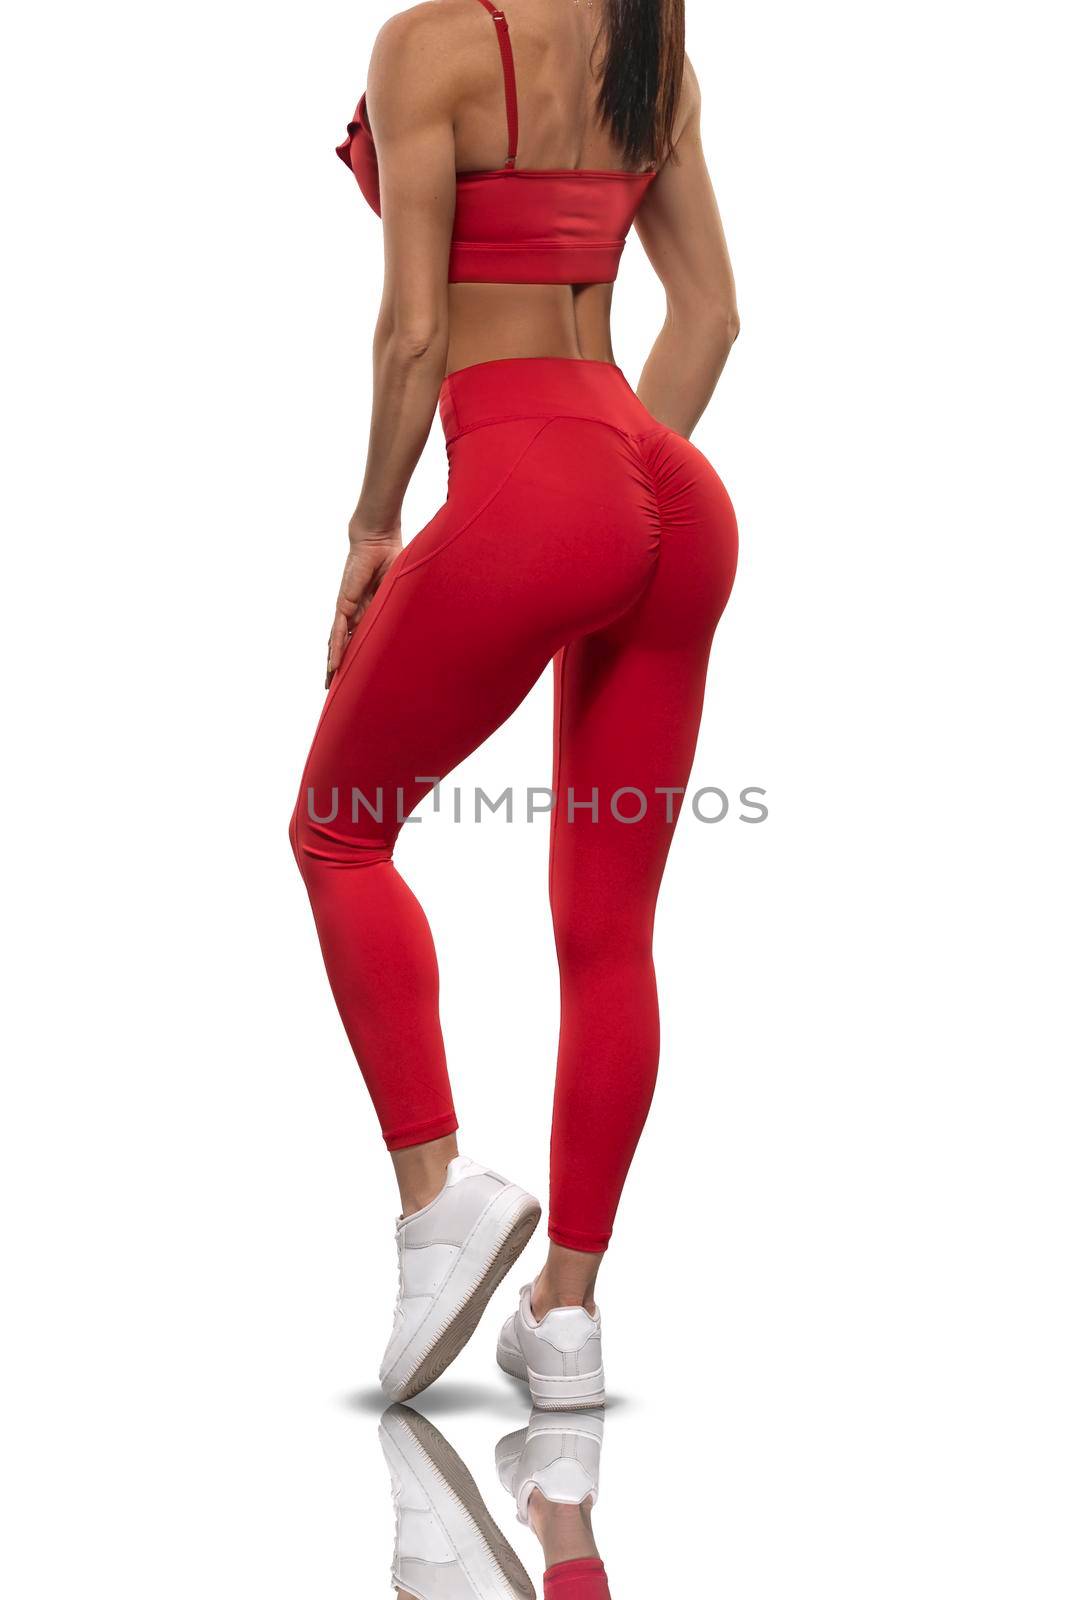 legs girl in red leggings and a top stay back on a white background by but_photo